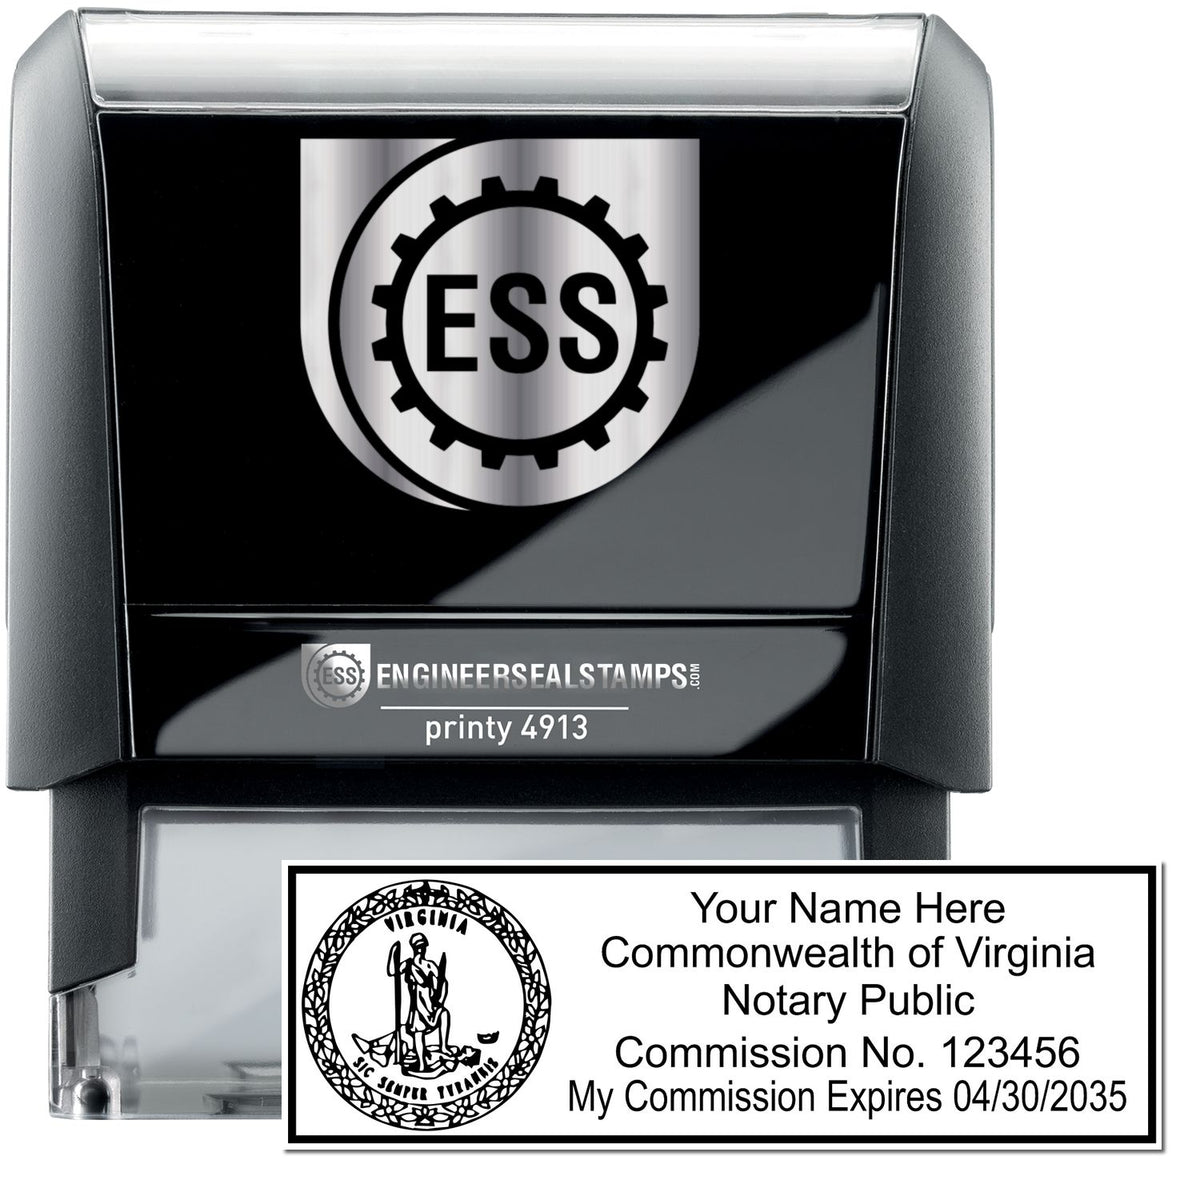 A self-inking stamp with a stamped image showing how your name, commission number, and expiration date with a round Virginia seal image on the left will appear after stamping from this notary stamp.